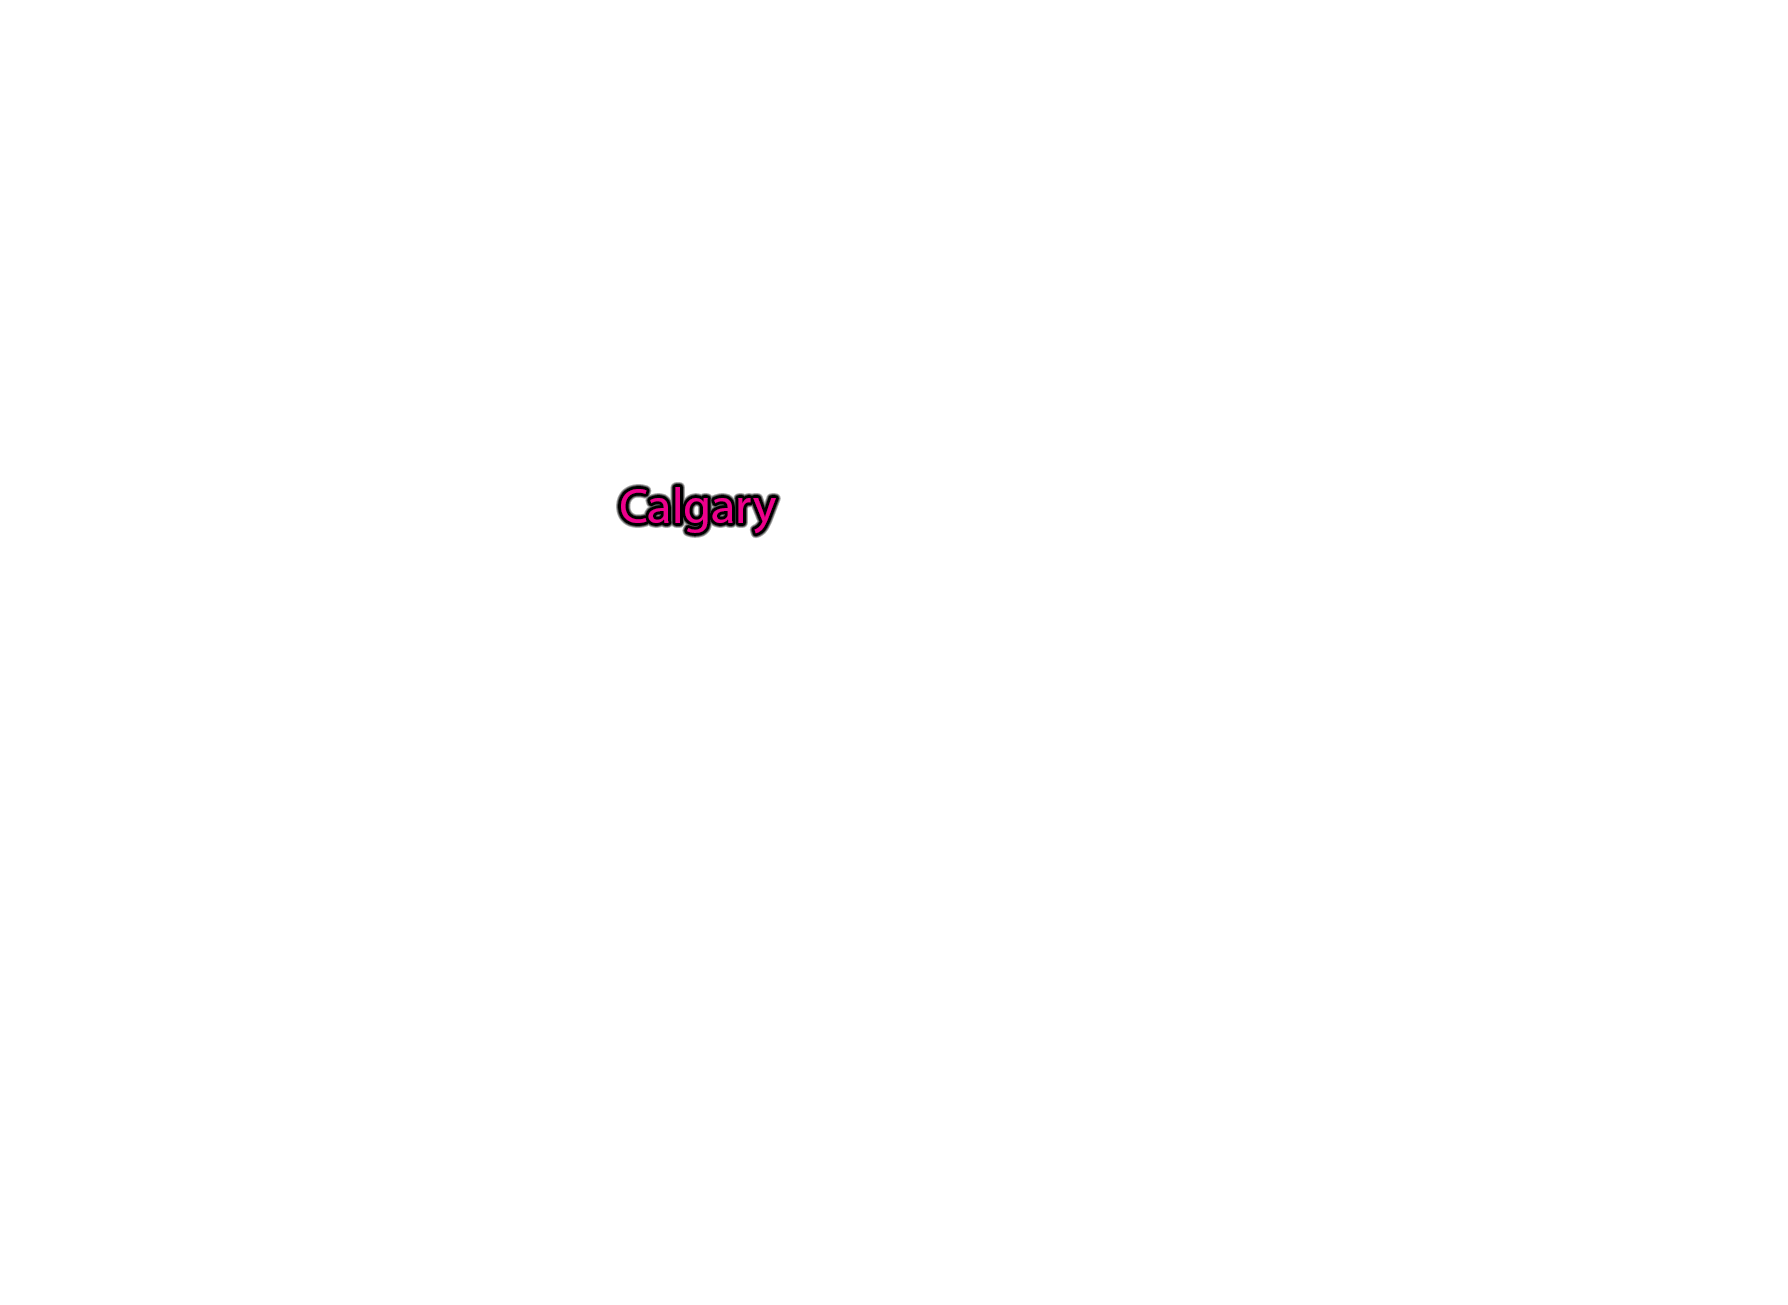 Calgary label with glow